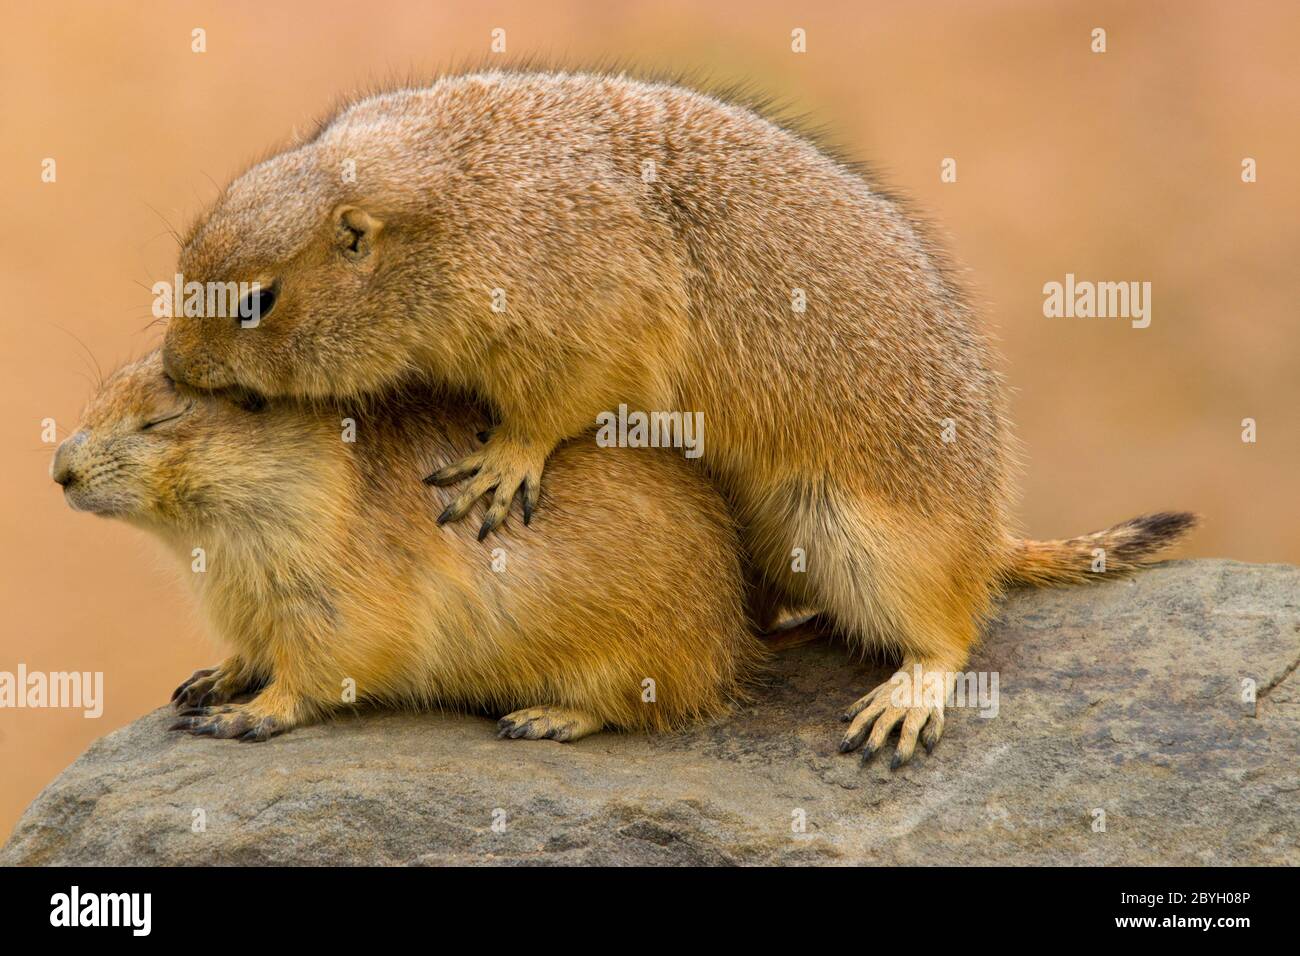 A pair of Black tailed prairie dogs are kissing, It is a rodent of the family Sciuridae found in the Great Plains of North America. Stock Photo